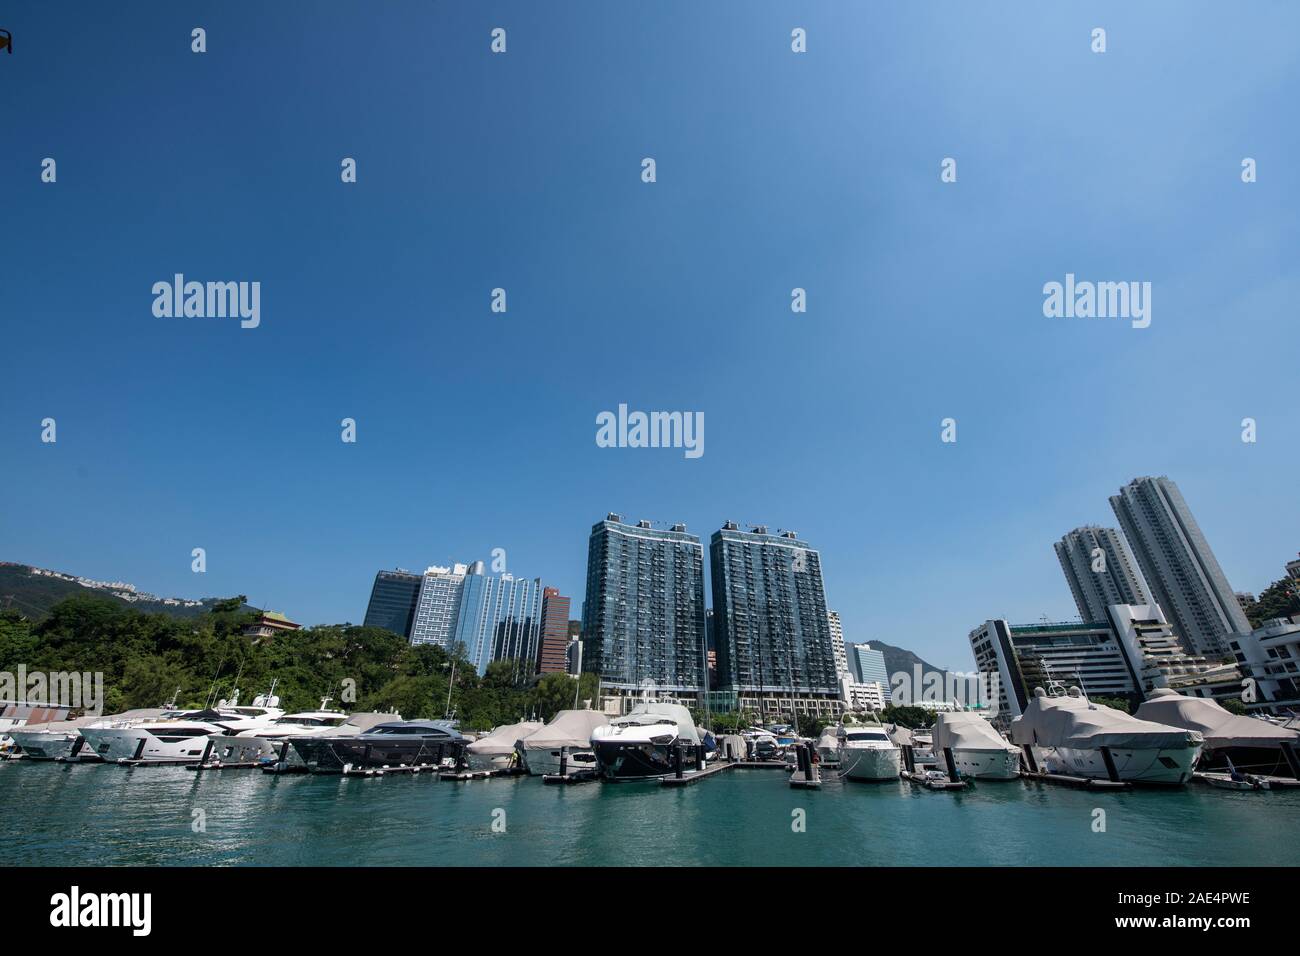 Luxury yachts moored in Hong Kong Island's Aberdeen Harbour Stock Photo